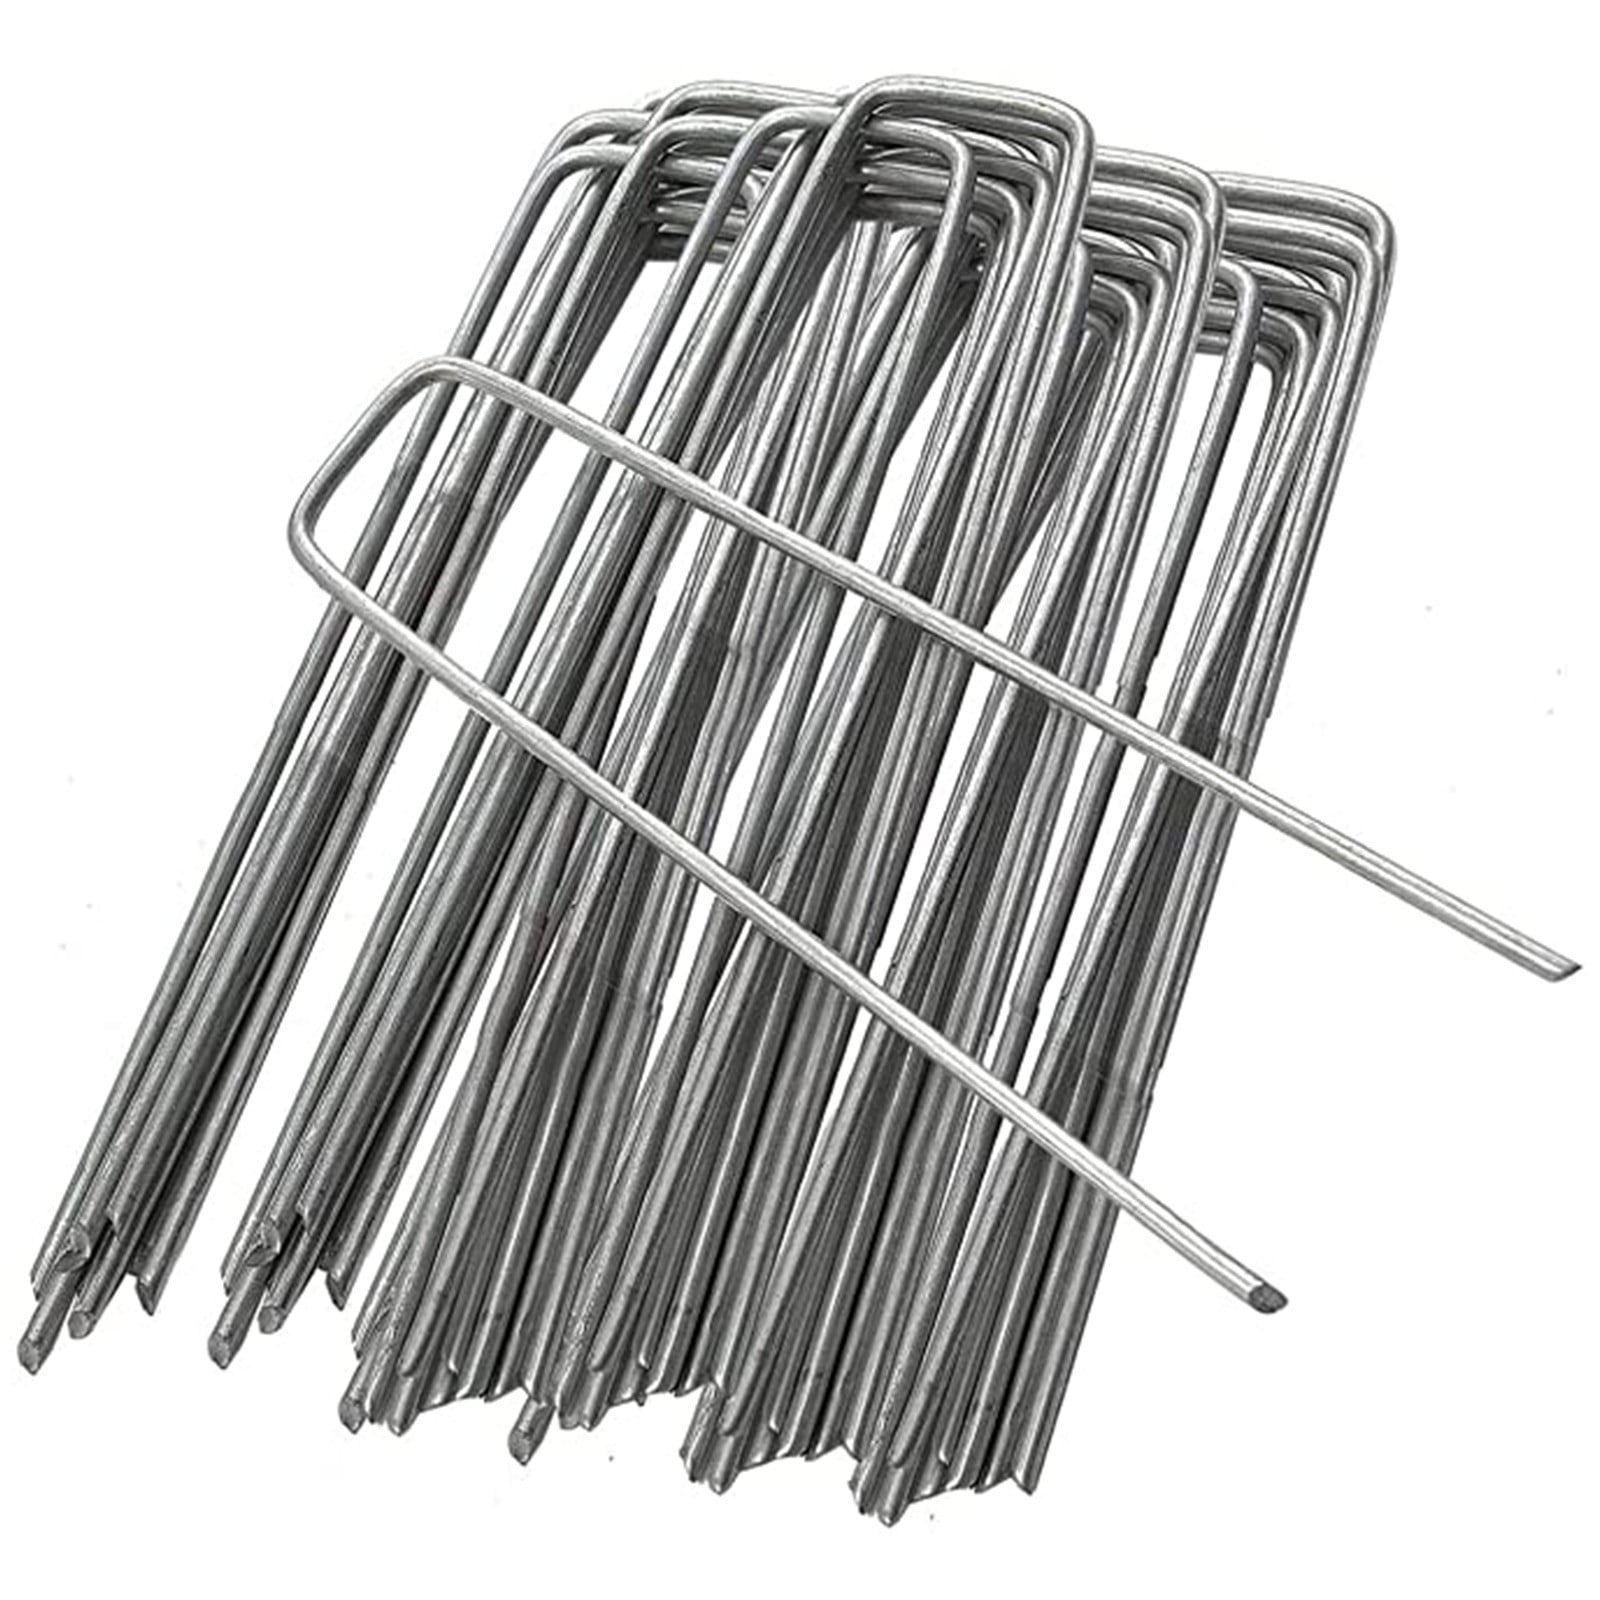 50 Pack 12" U Shaped Garden Staples Securing Stable Fabric Pins Pegs Sod Stakes 